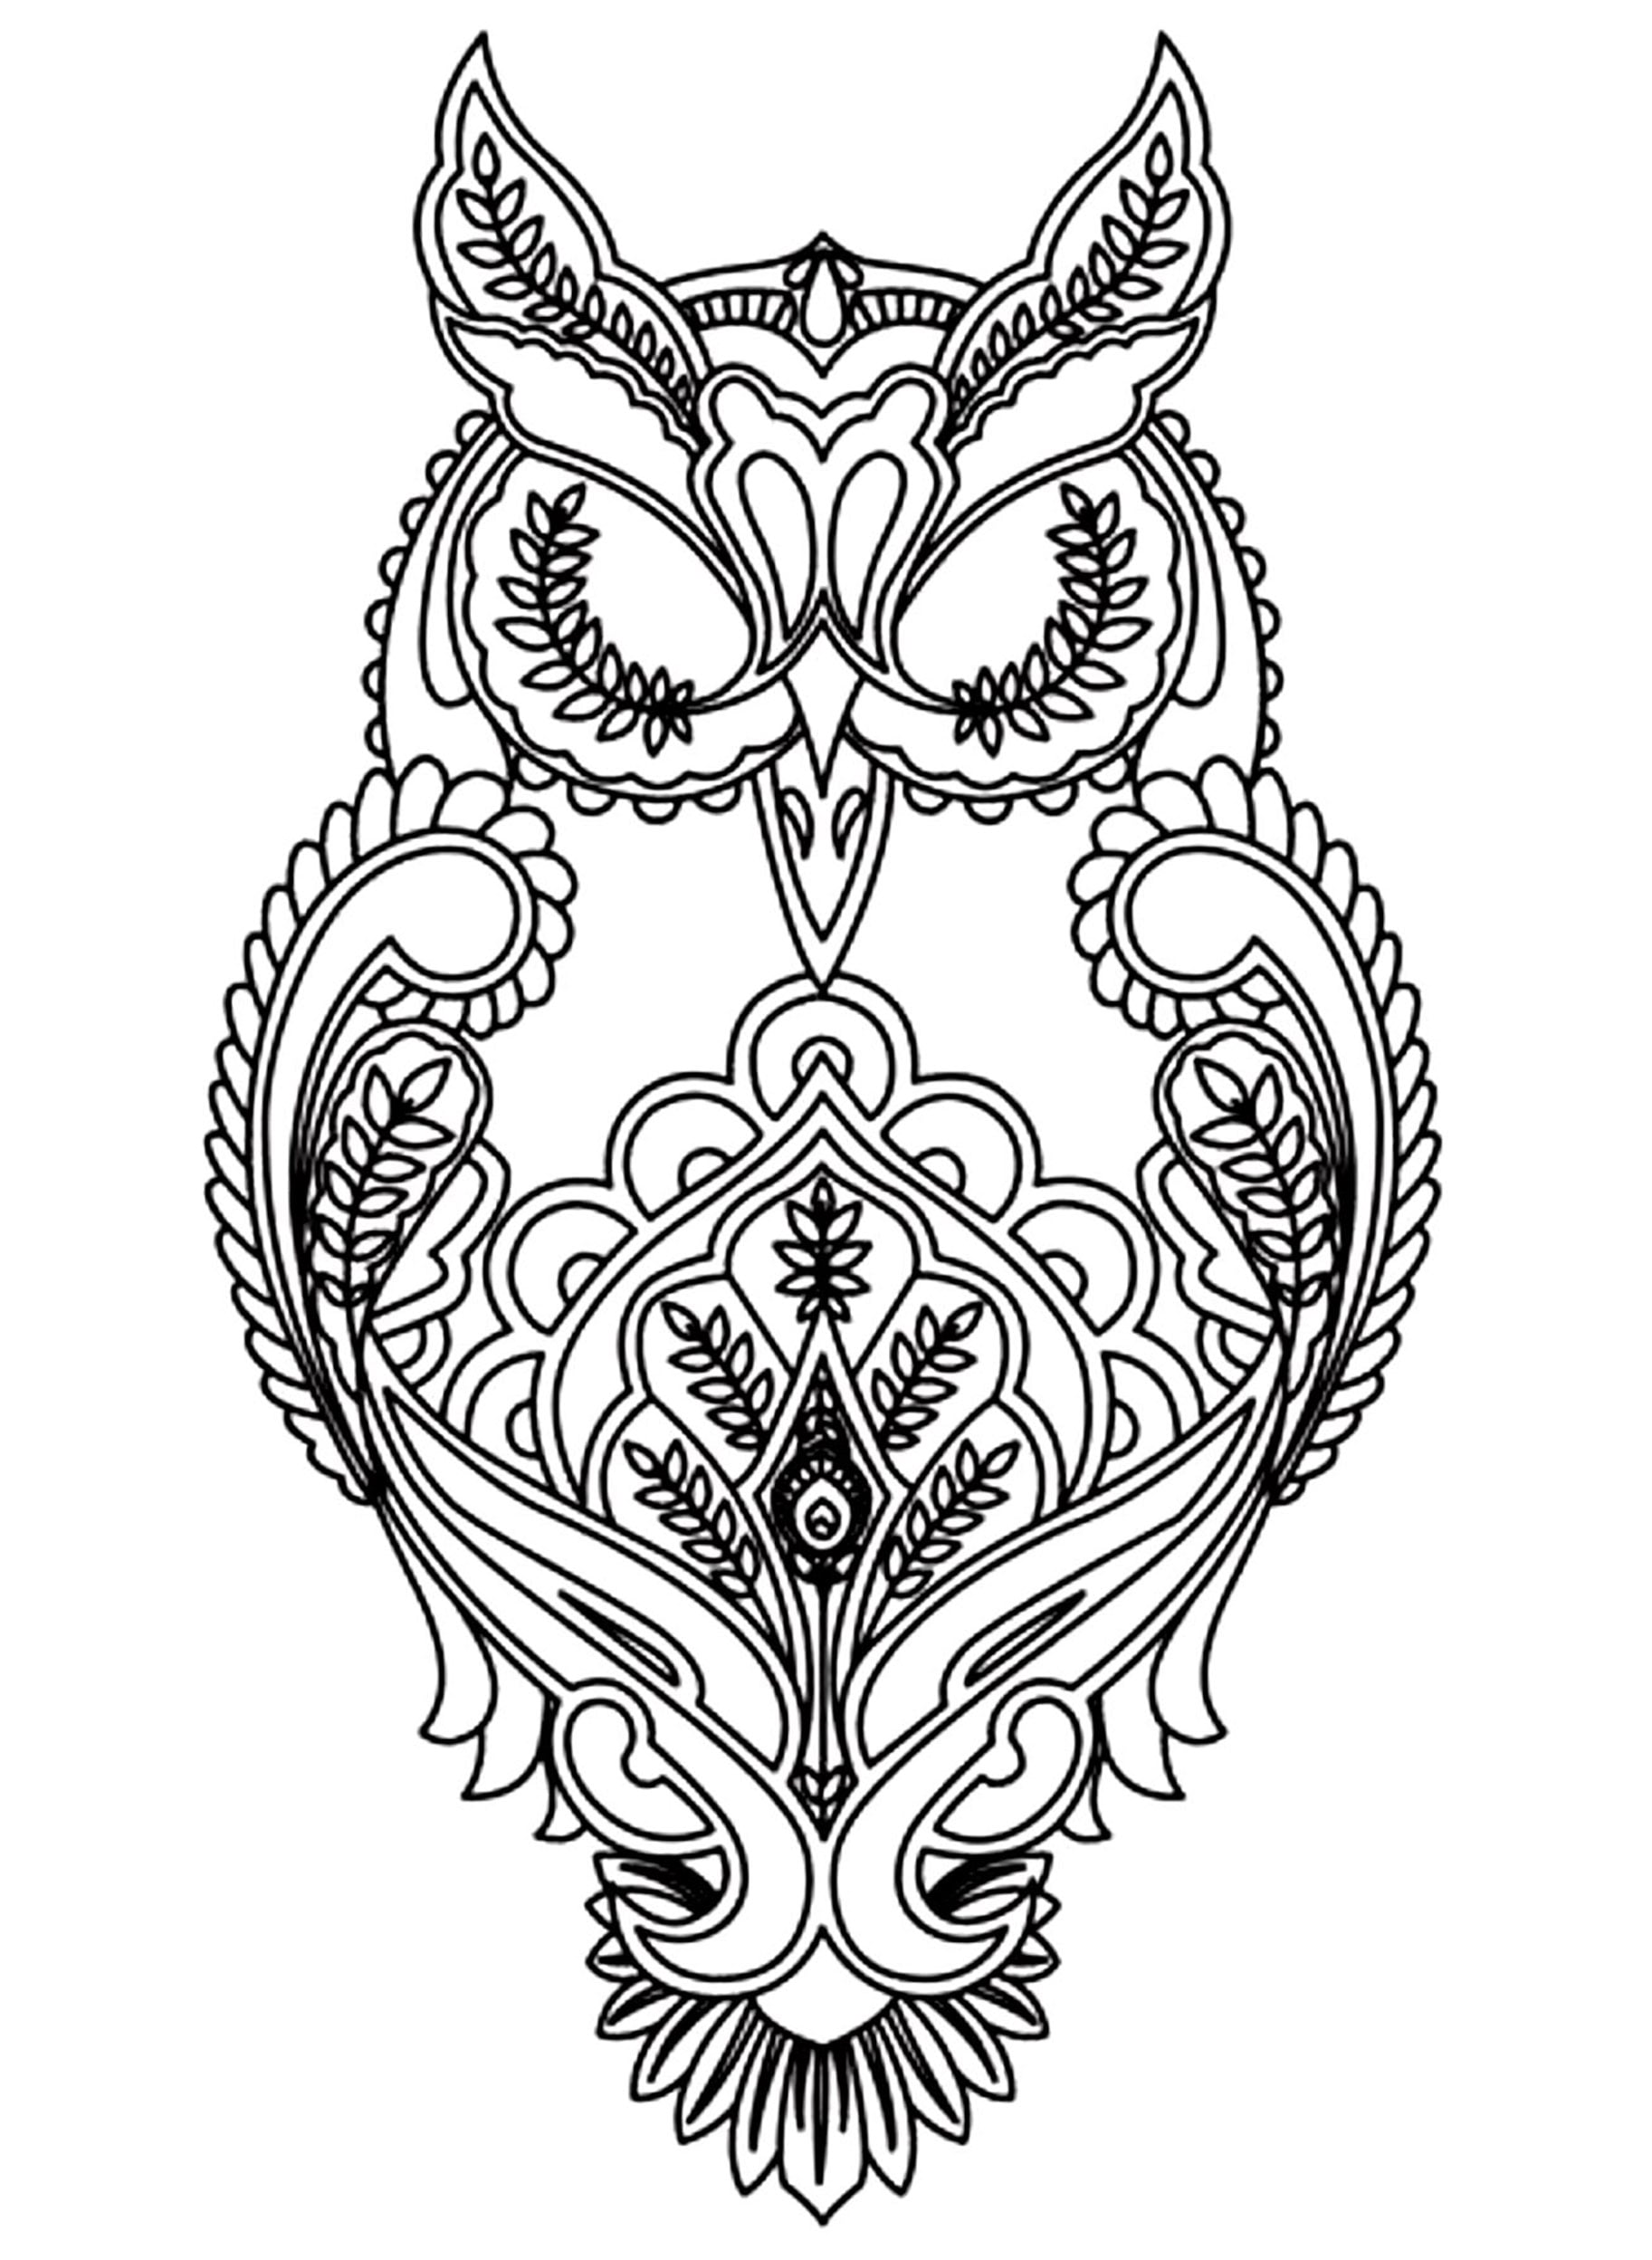 Get the coloring page Owl   20 Printable Adult Coloring Pages ...